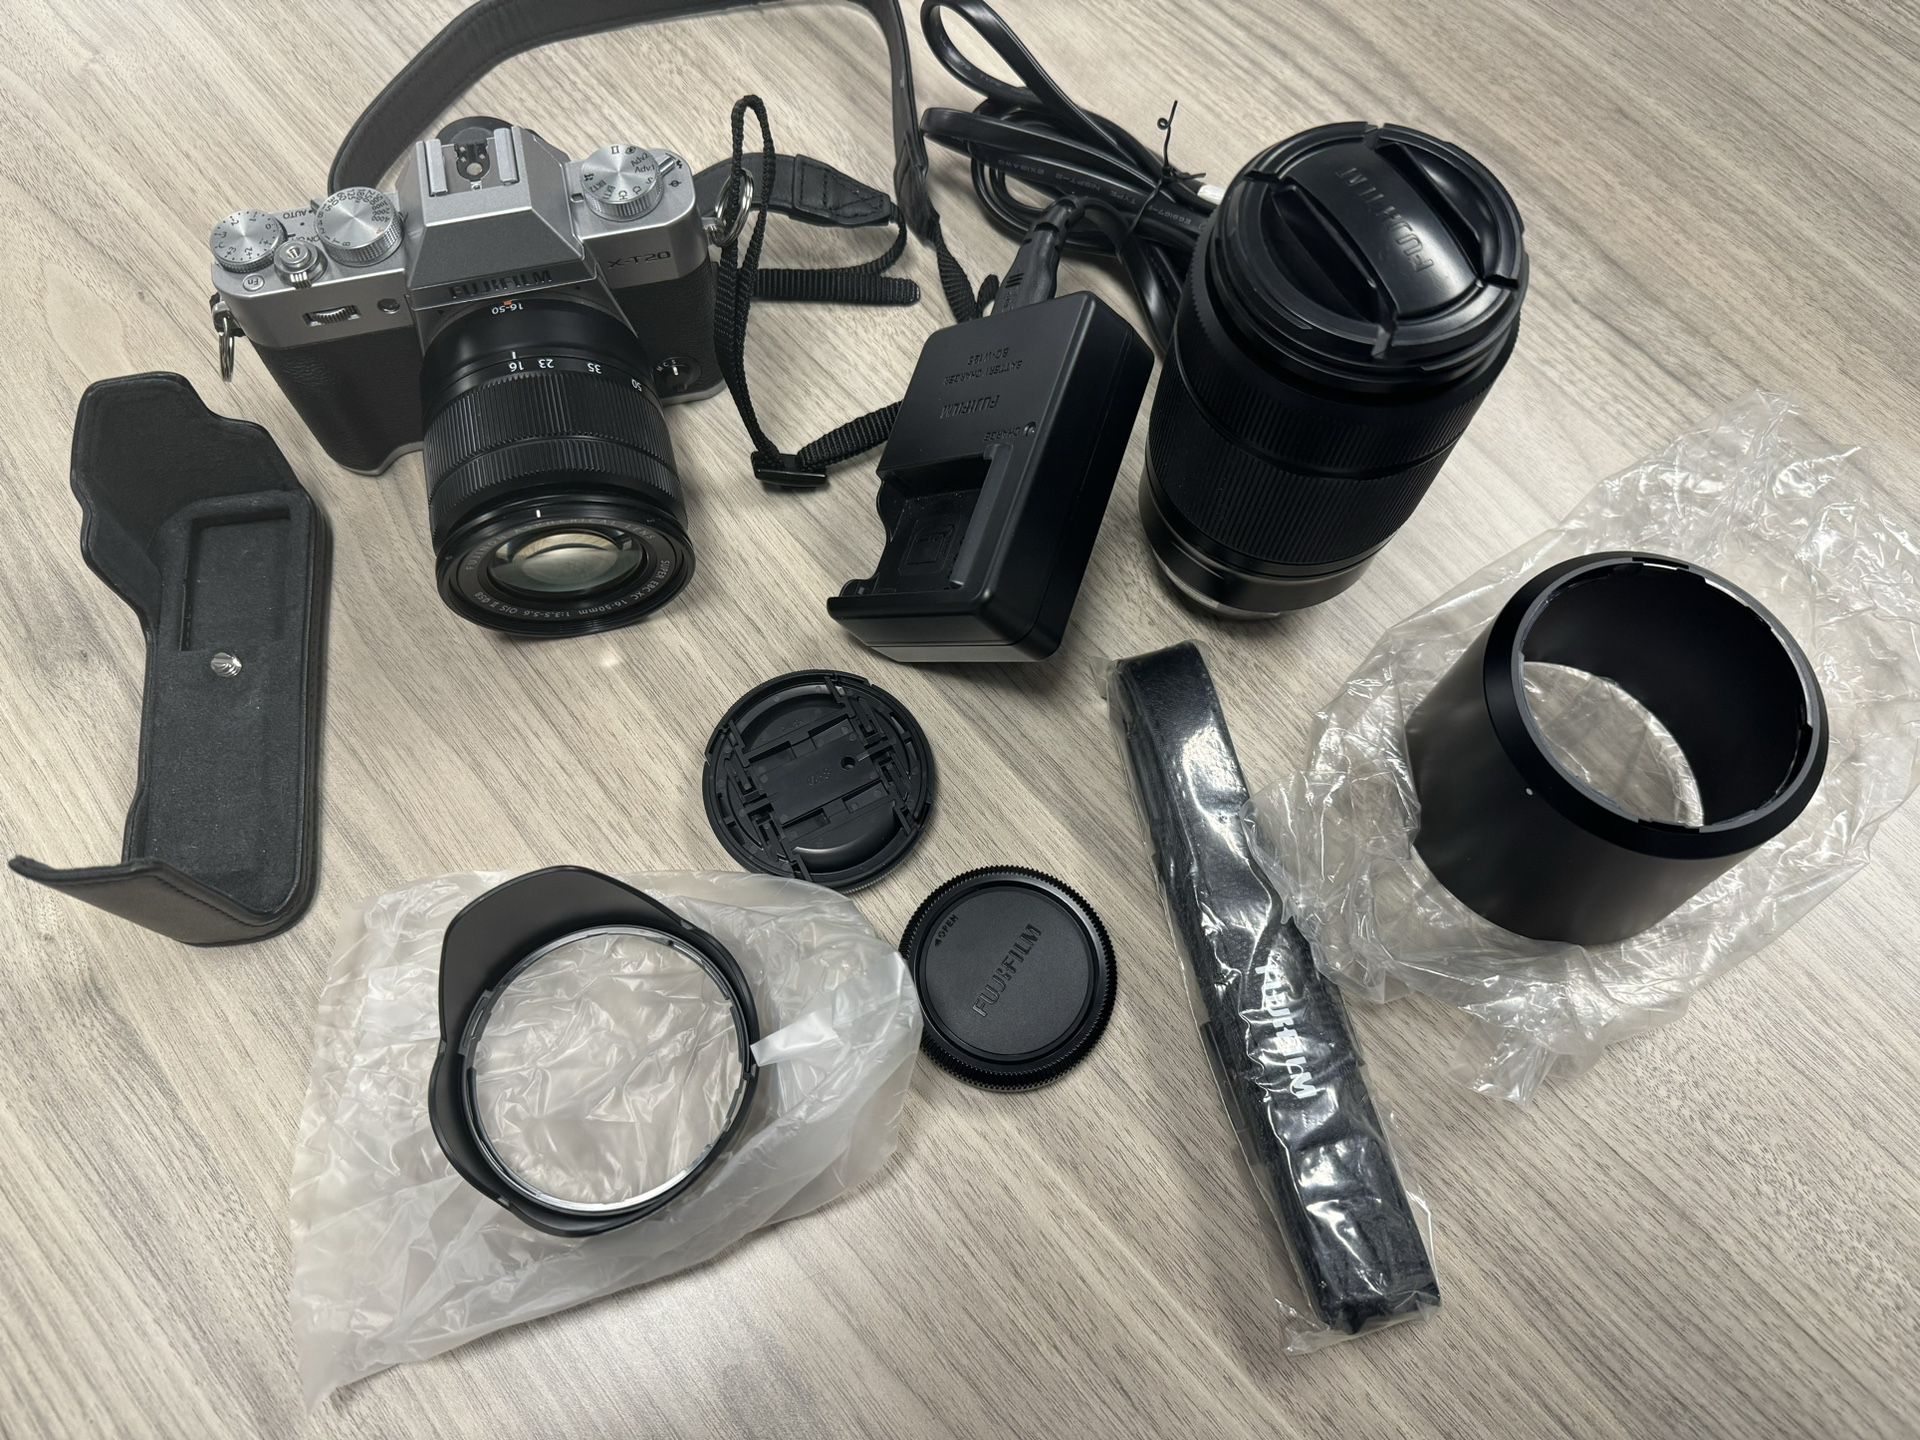 Fuji X-T20 With Extras